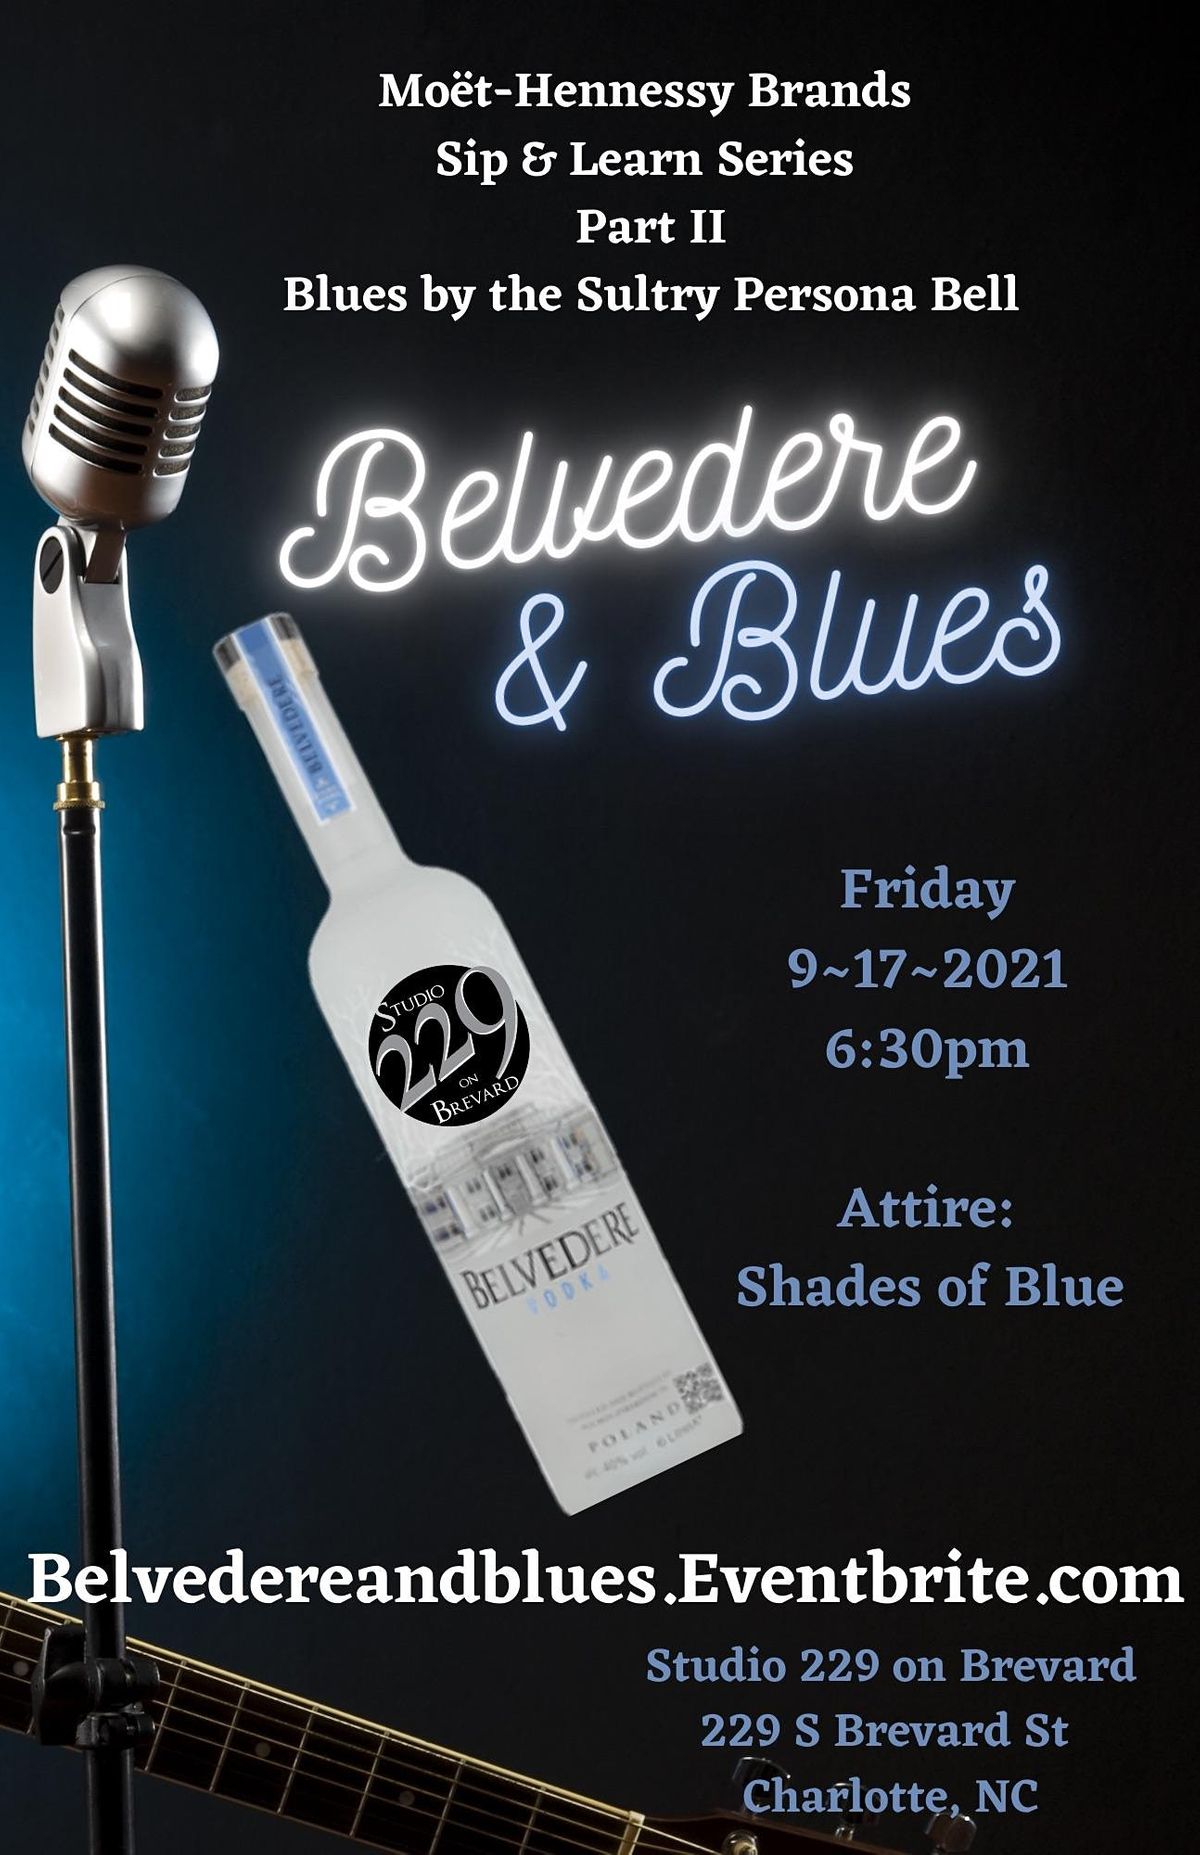 Belvedere & Blue - Wear Your Shades of Blue